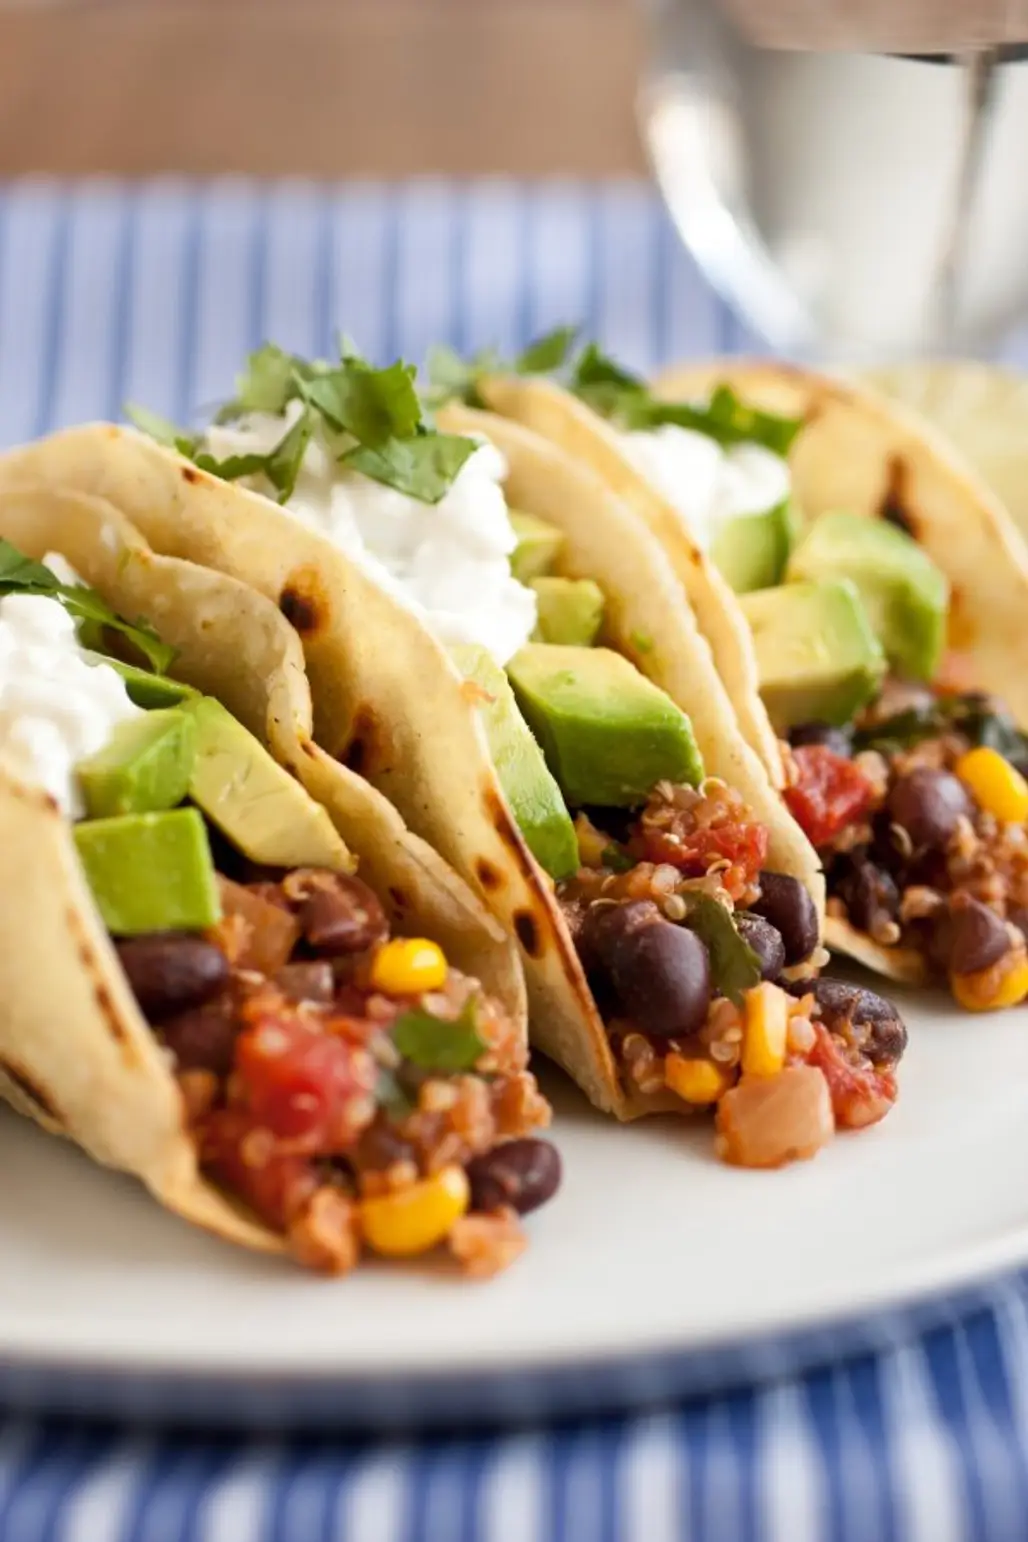 Have a Couple of Chicken Soft Tacos with Beans